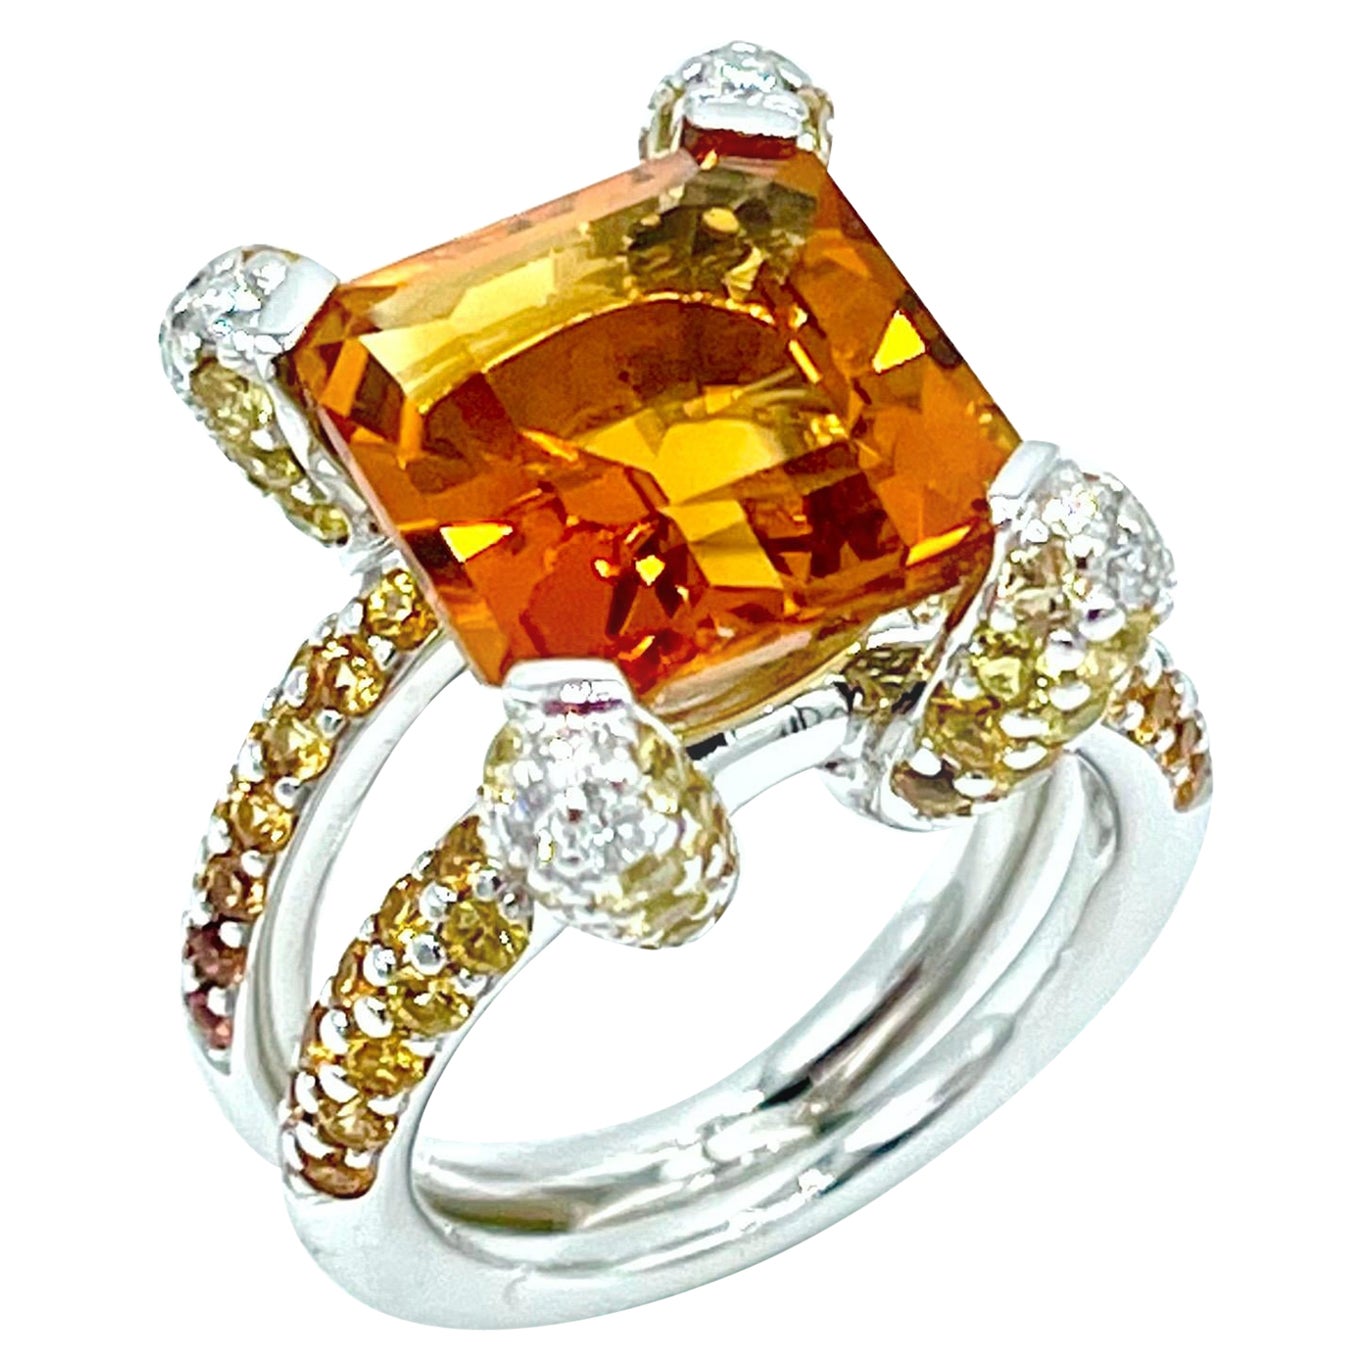 6.00 Carat Madeira Citrine in a Pave Diamond and Citrine White Gold Ring